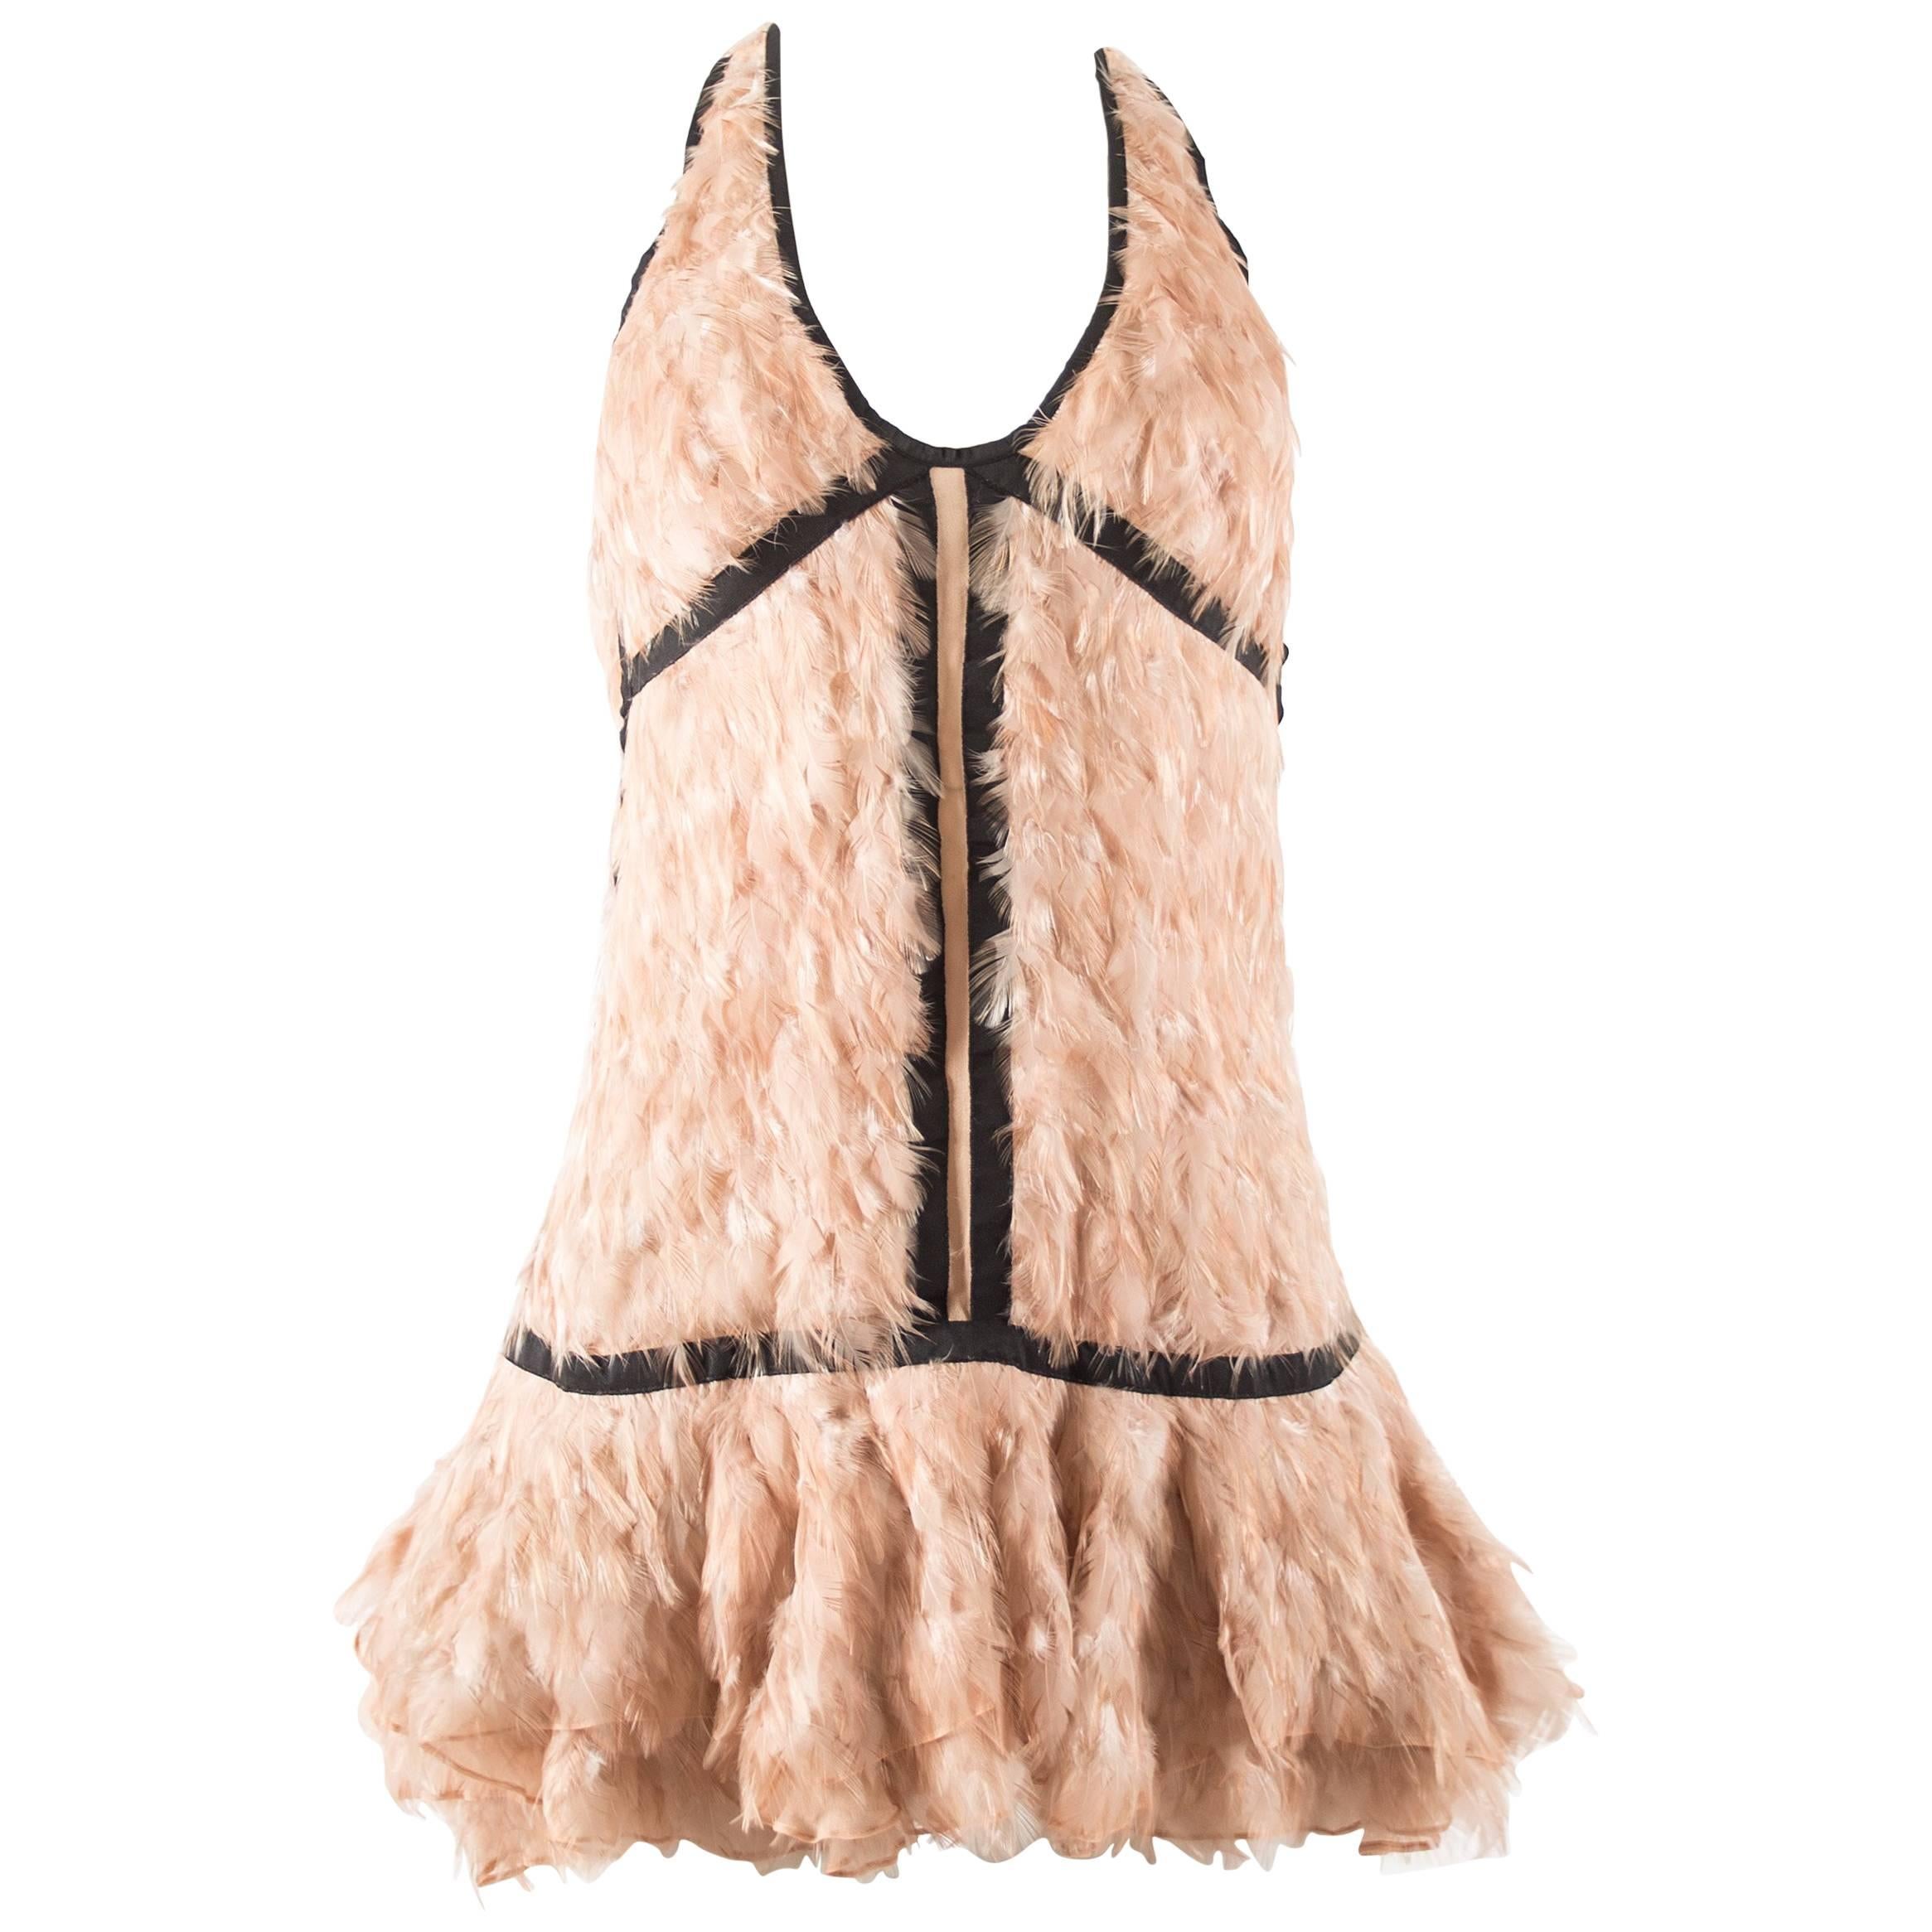 Tom For for Gucci Spring-Summer 2003 pale pink feather mini dress